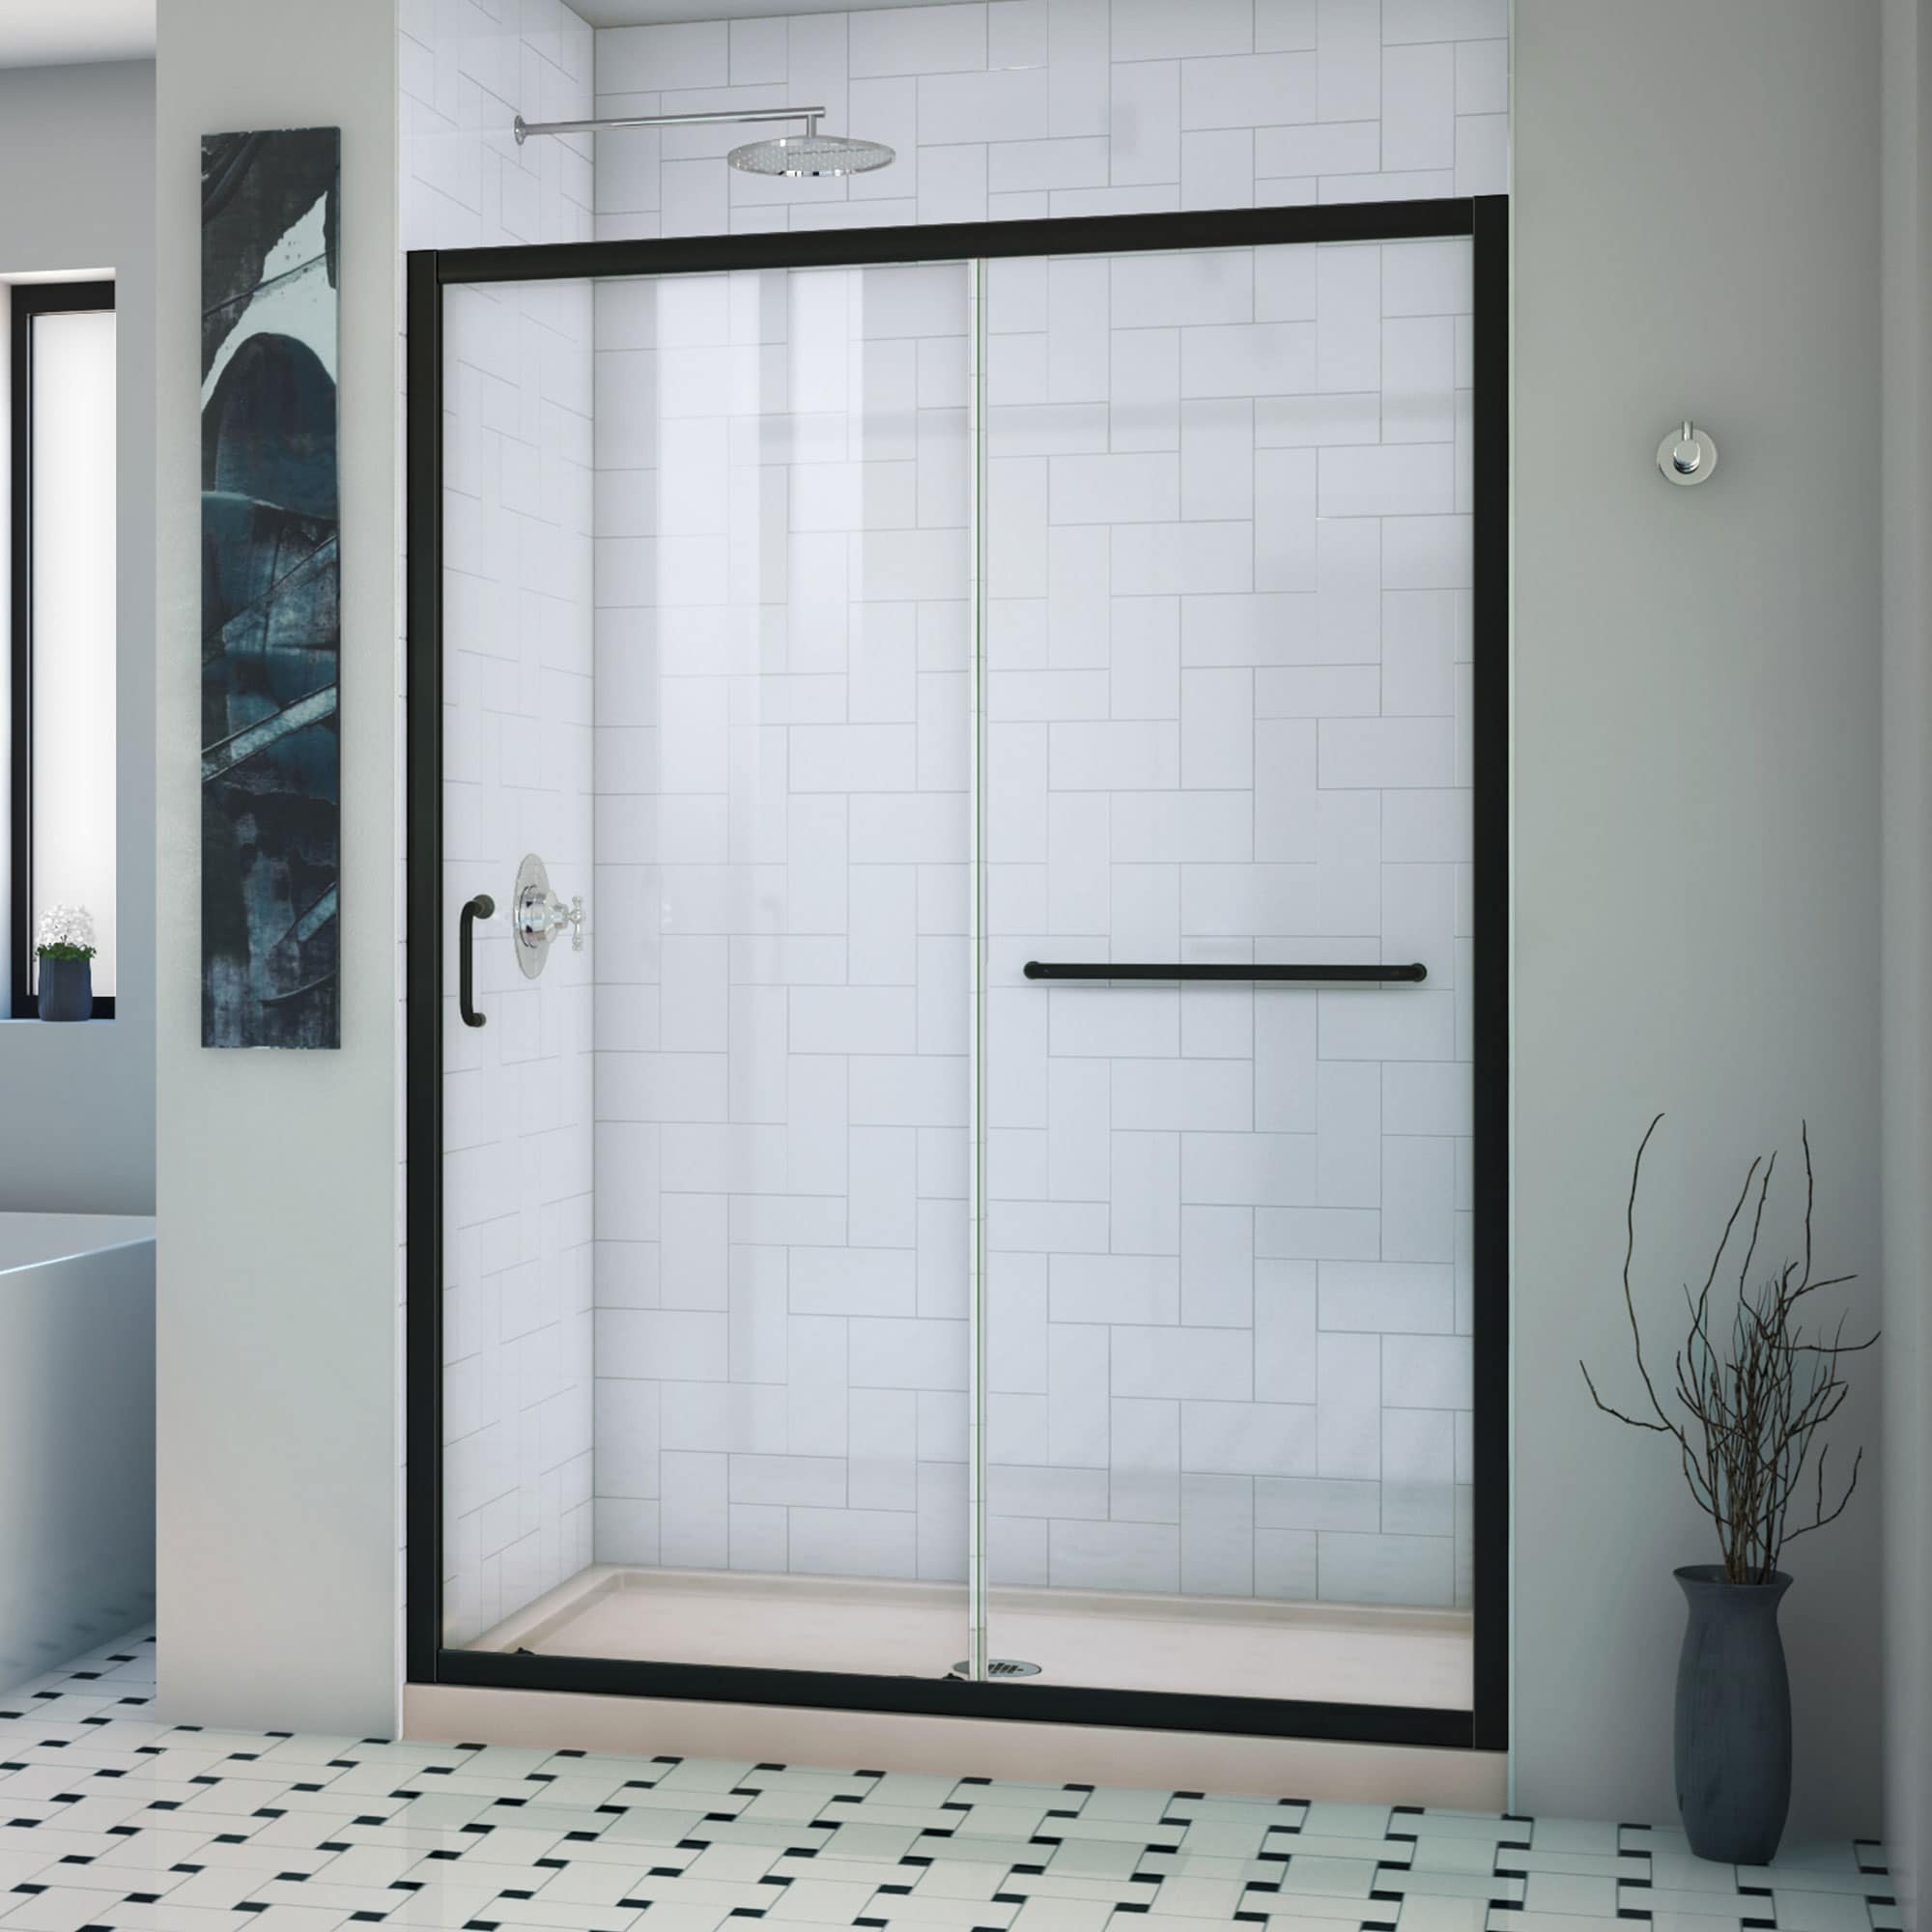 DreamLine Infinity-Z Satin Black 2-Piece 32-in x 54-in x 75-in Rectangular Alcove Shower Kit (Center Drain) with Base and Door Included